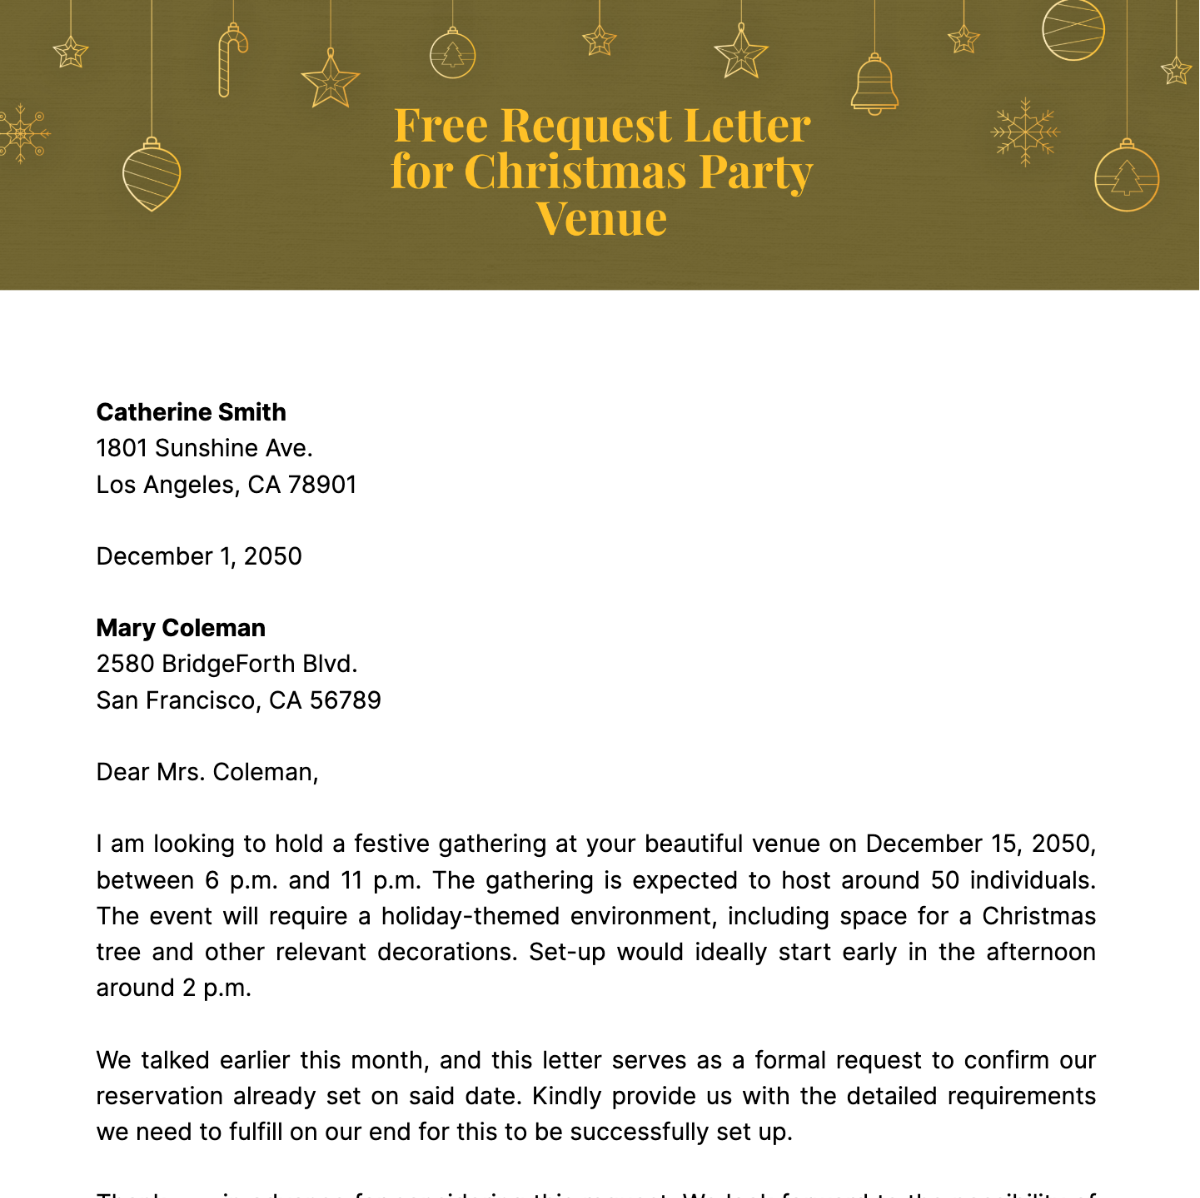 Request Letter for Christmas Party Venue Template